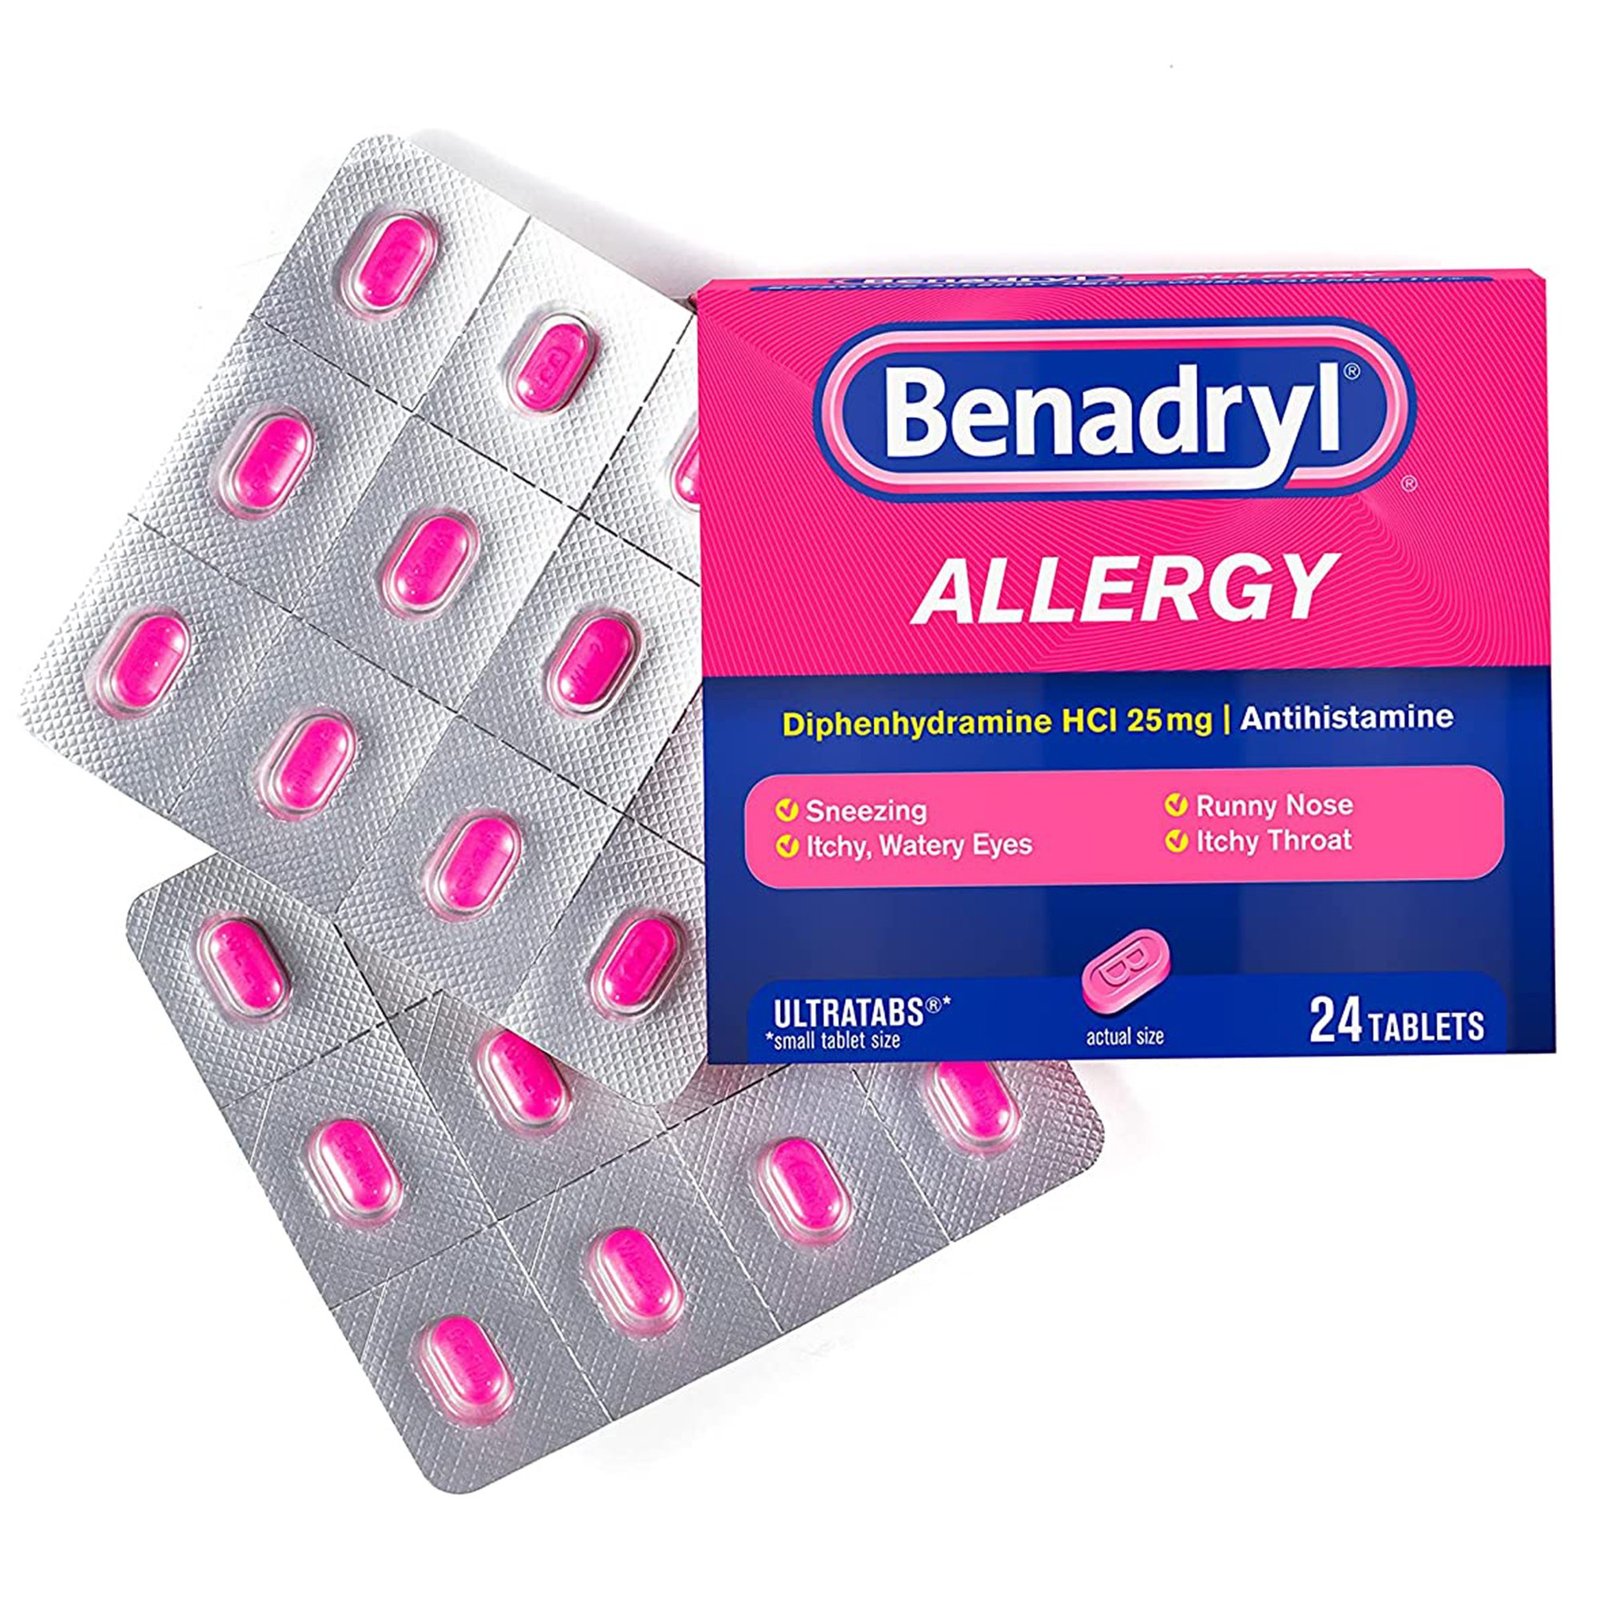 You are currently viewing 100 uses of benadryl